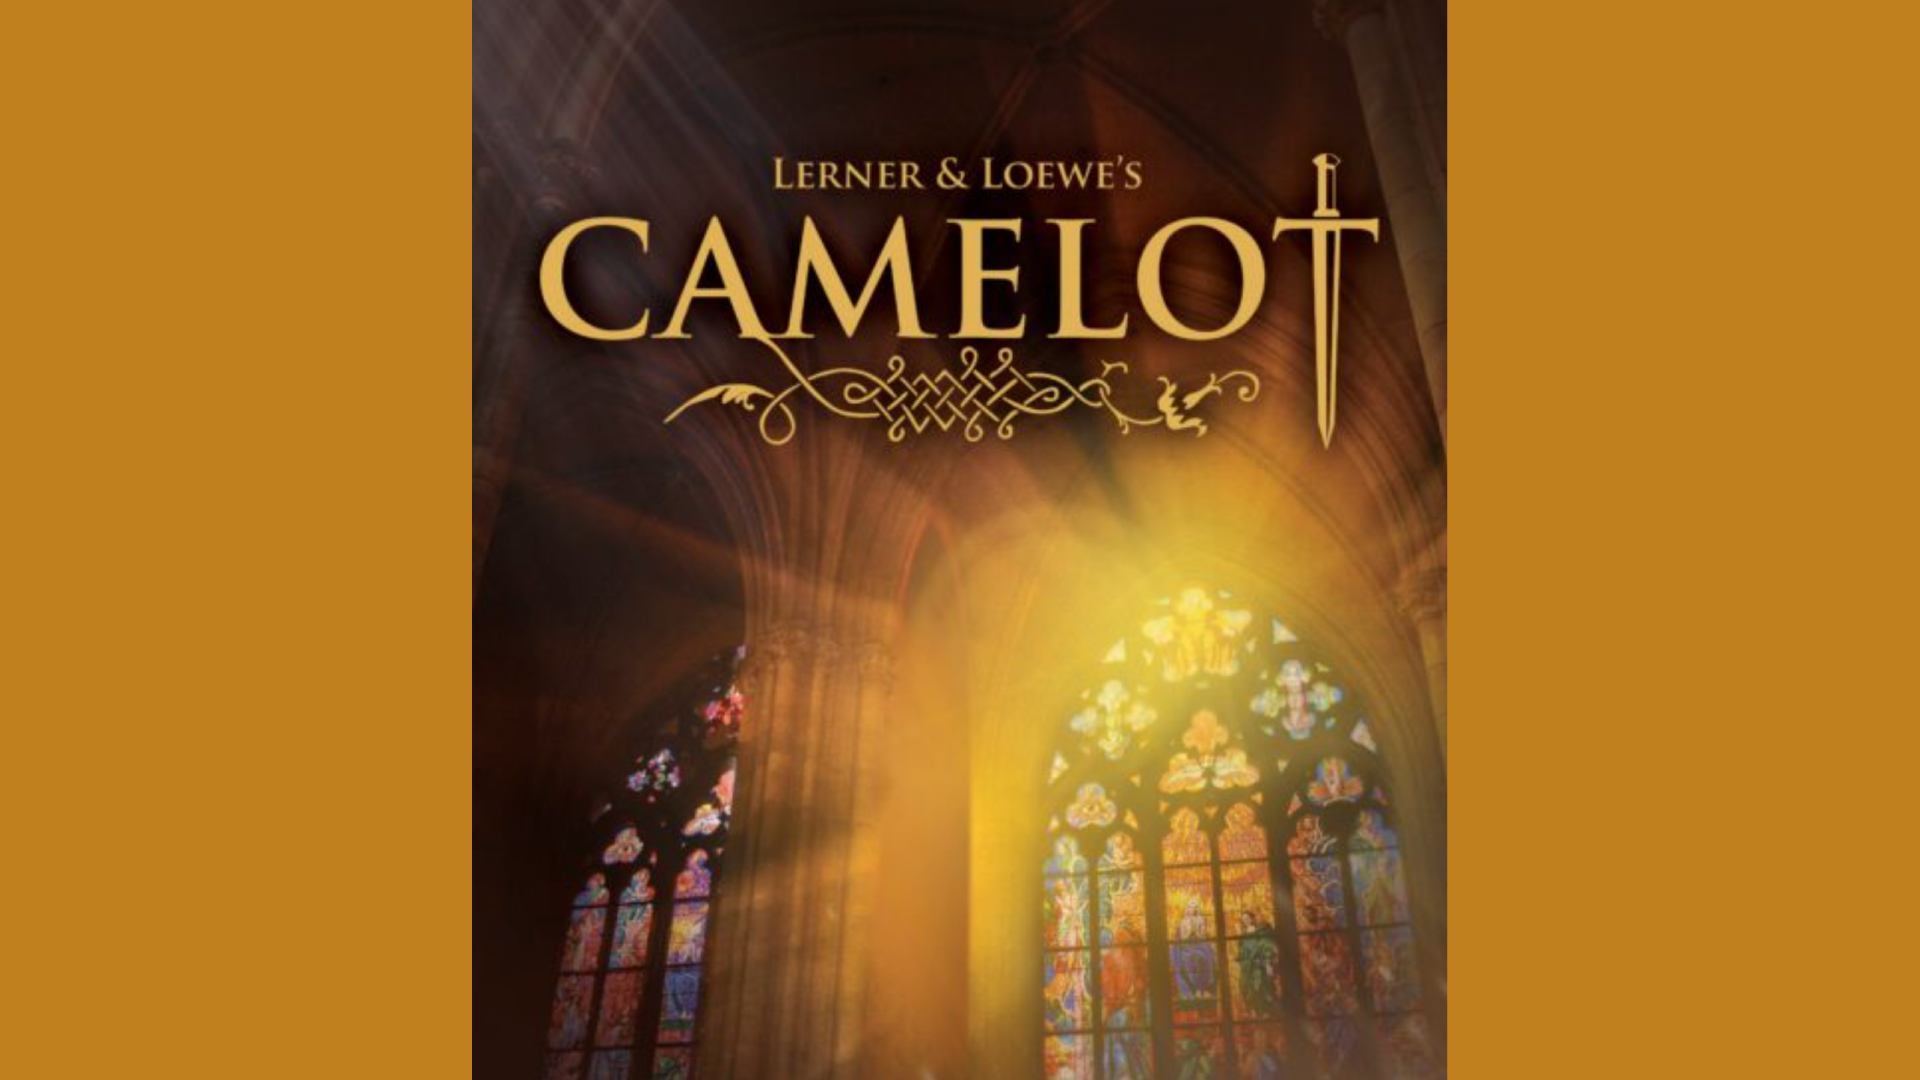 fairy-tale musical Camelot